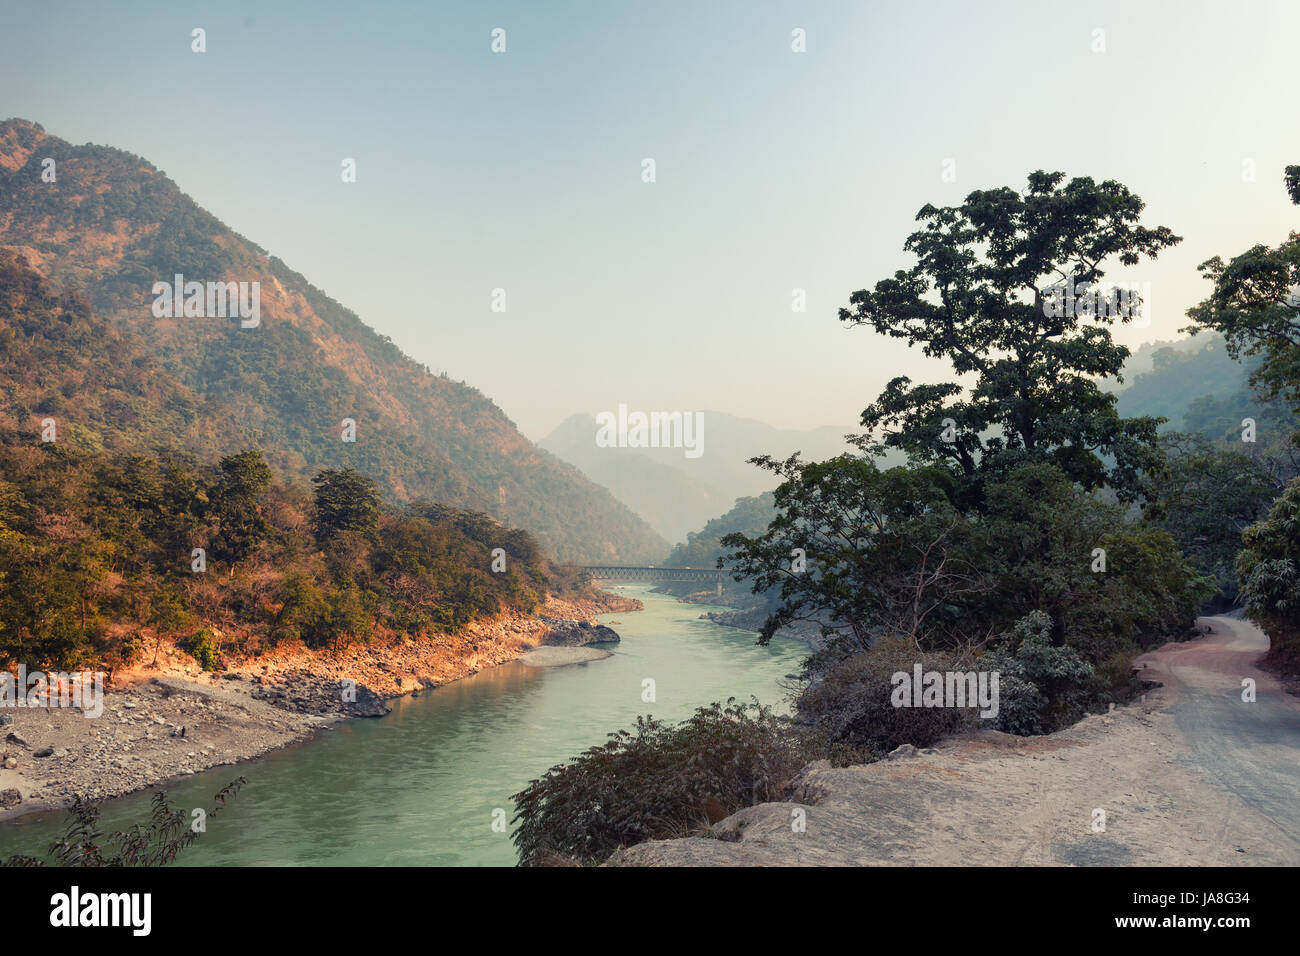 Evening landscape with a river, mountains and a bridge. India, Rishikesh Stock Photo